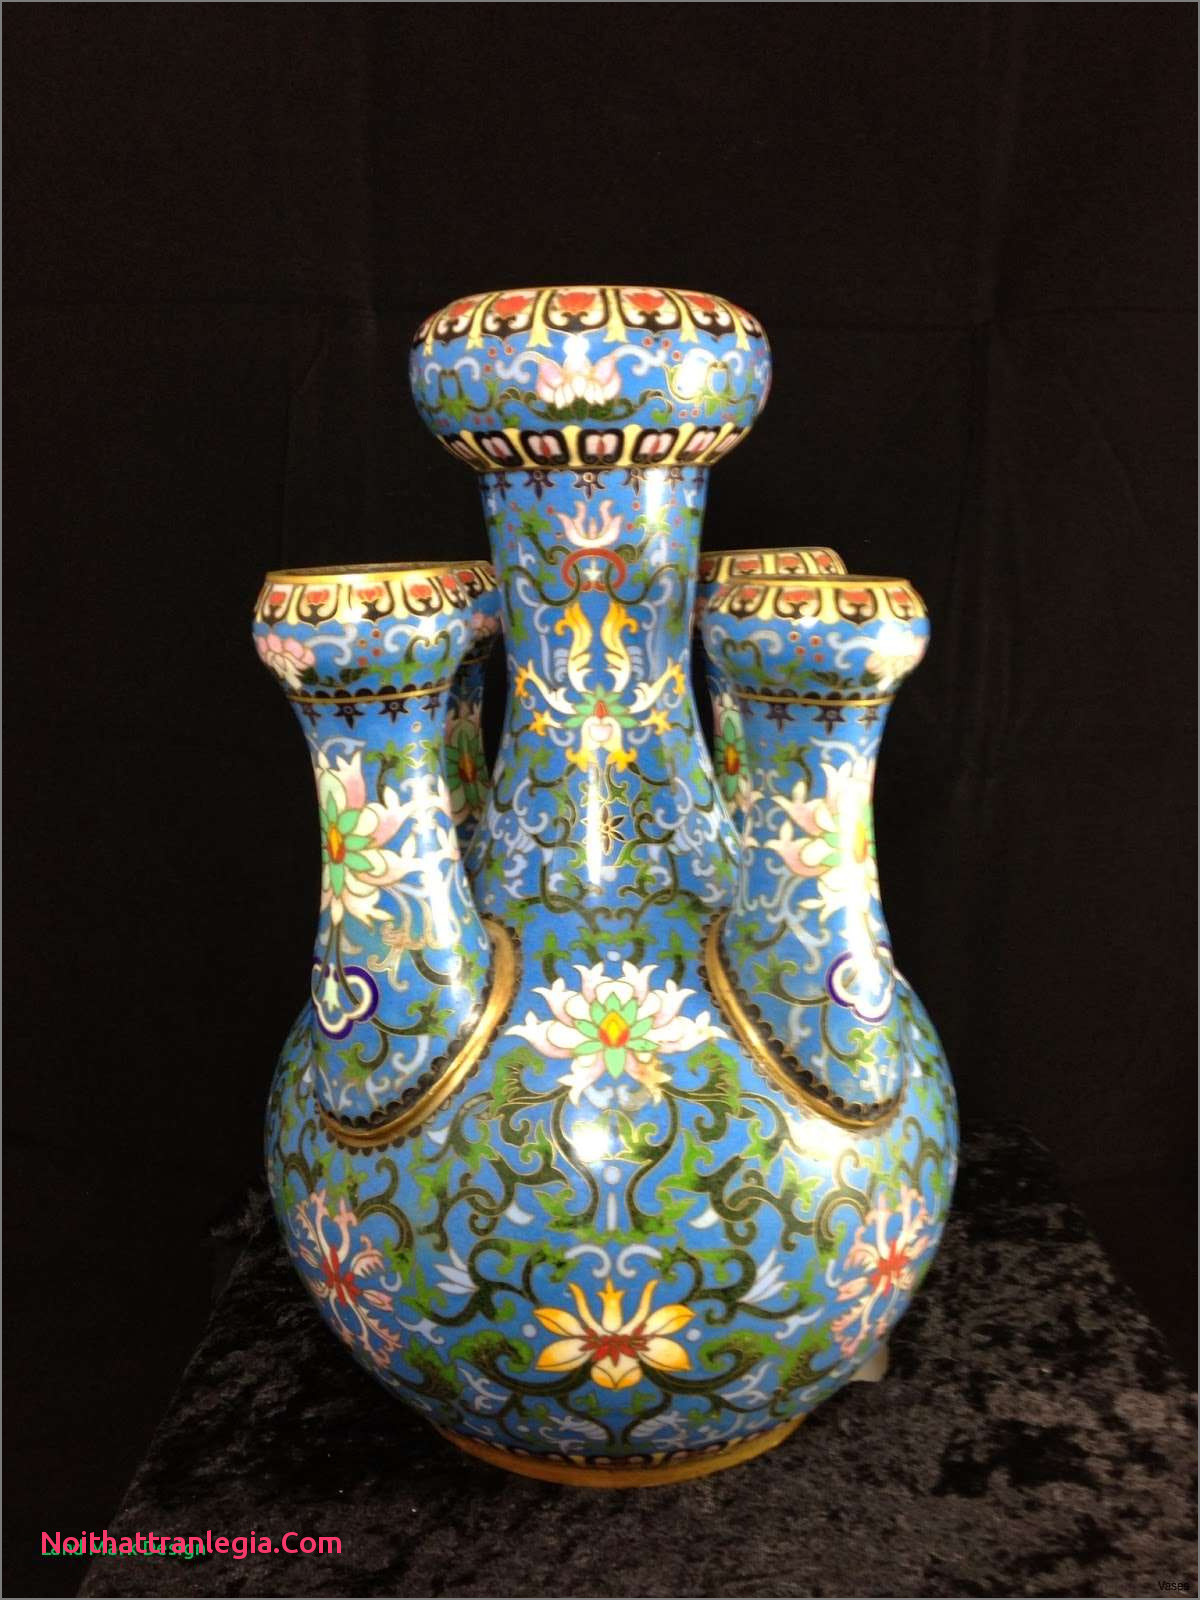 18 Stylish Vintage Waterford Vase 2024 free download vintage waterford vase of 20 chinese antique vase noithattranlegia vases design inside 213 1h vases antique asian the increased trade of chinese ware during 16th century has significantly